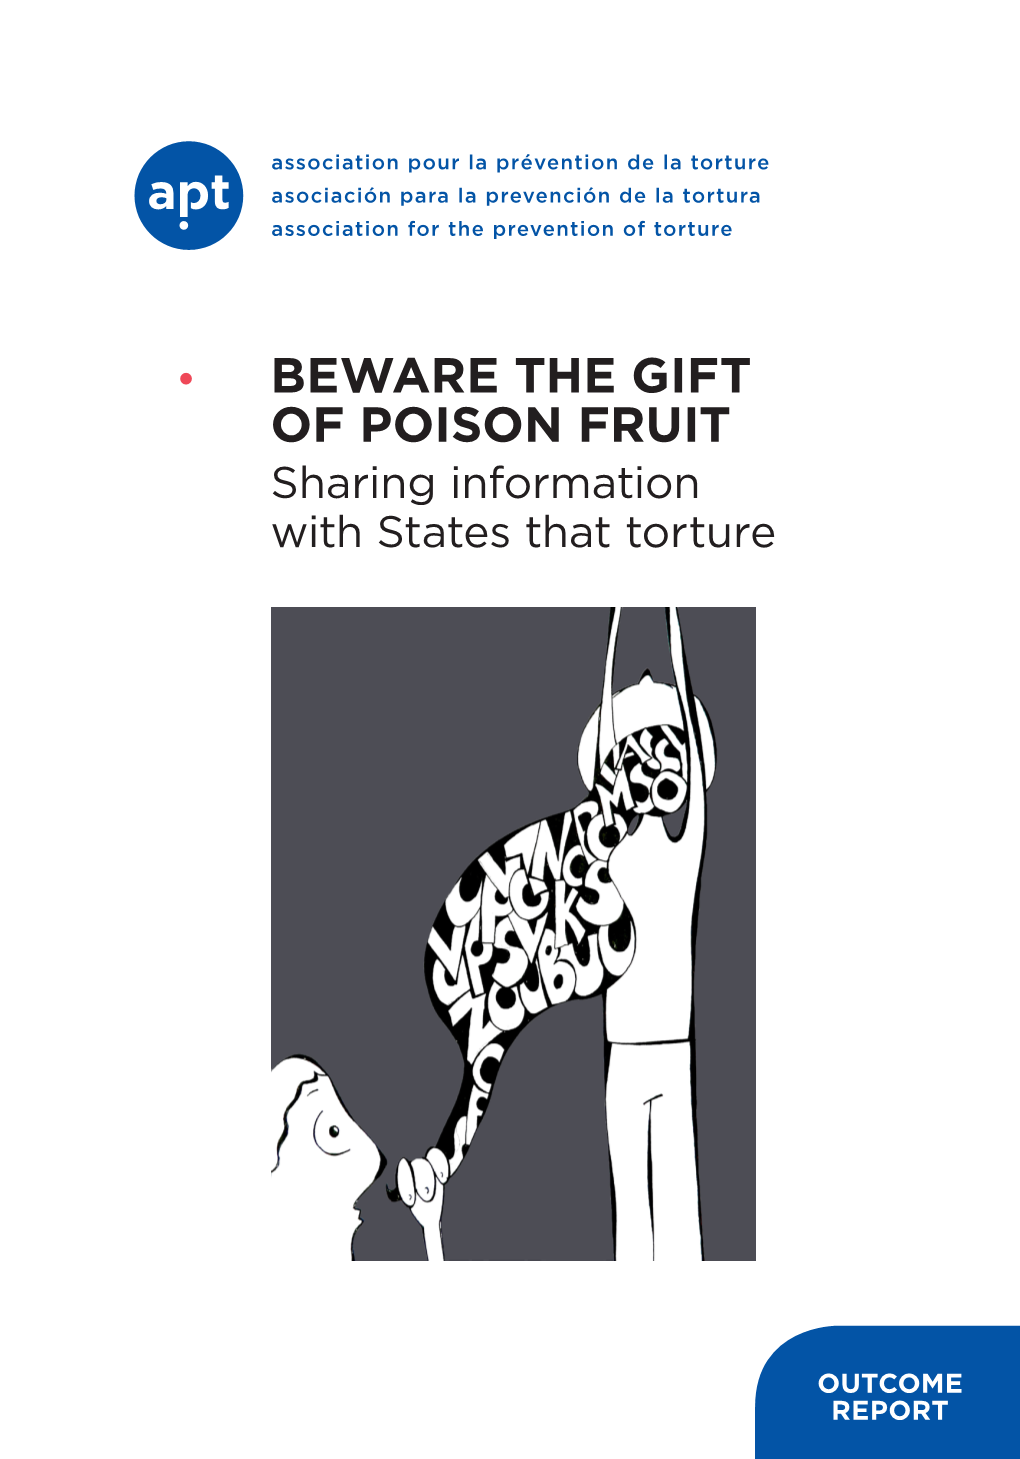 Beware the Gift of Poison Fruit